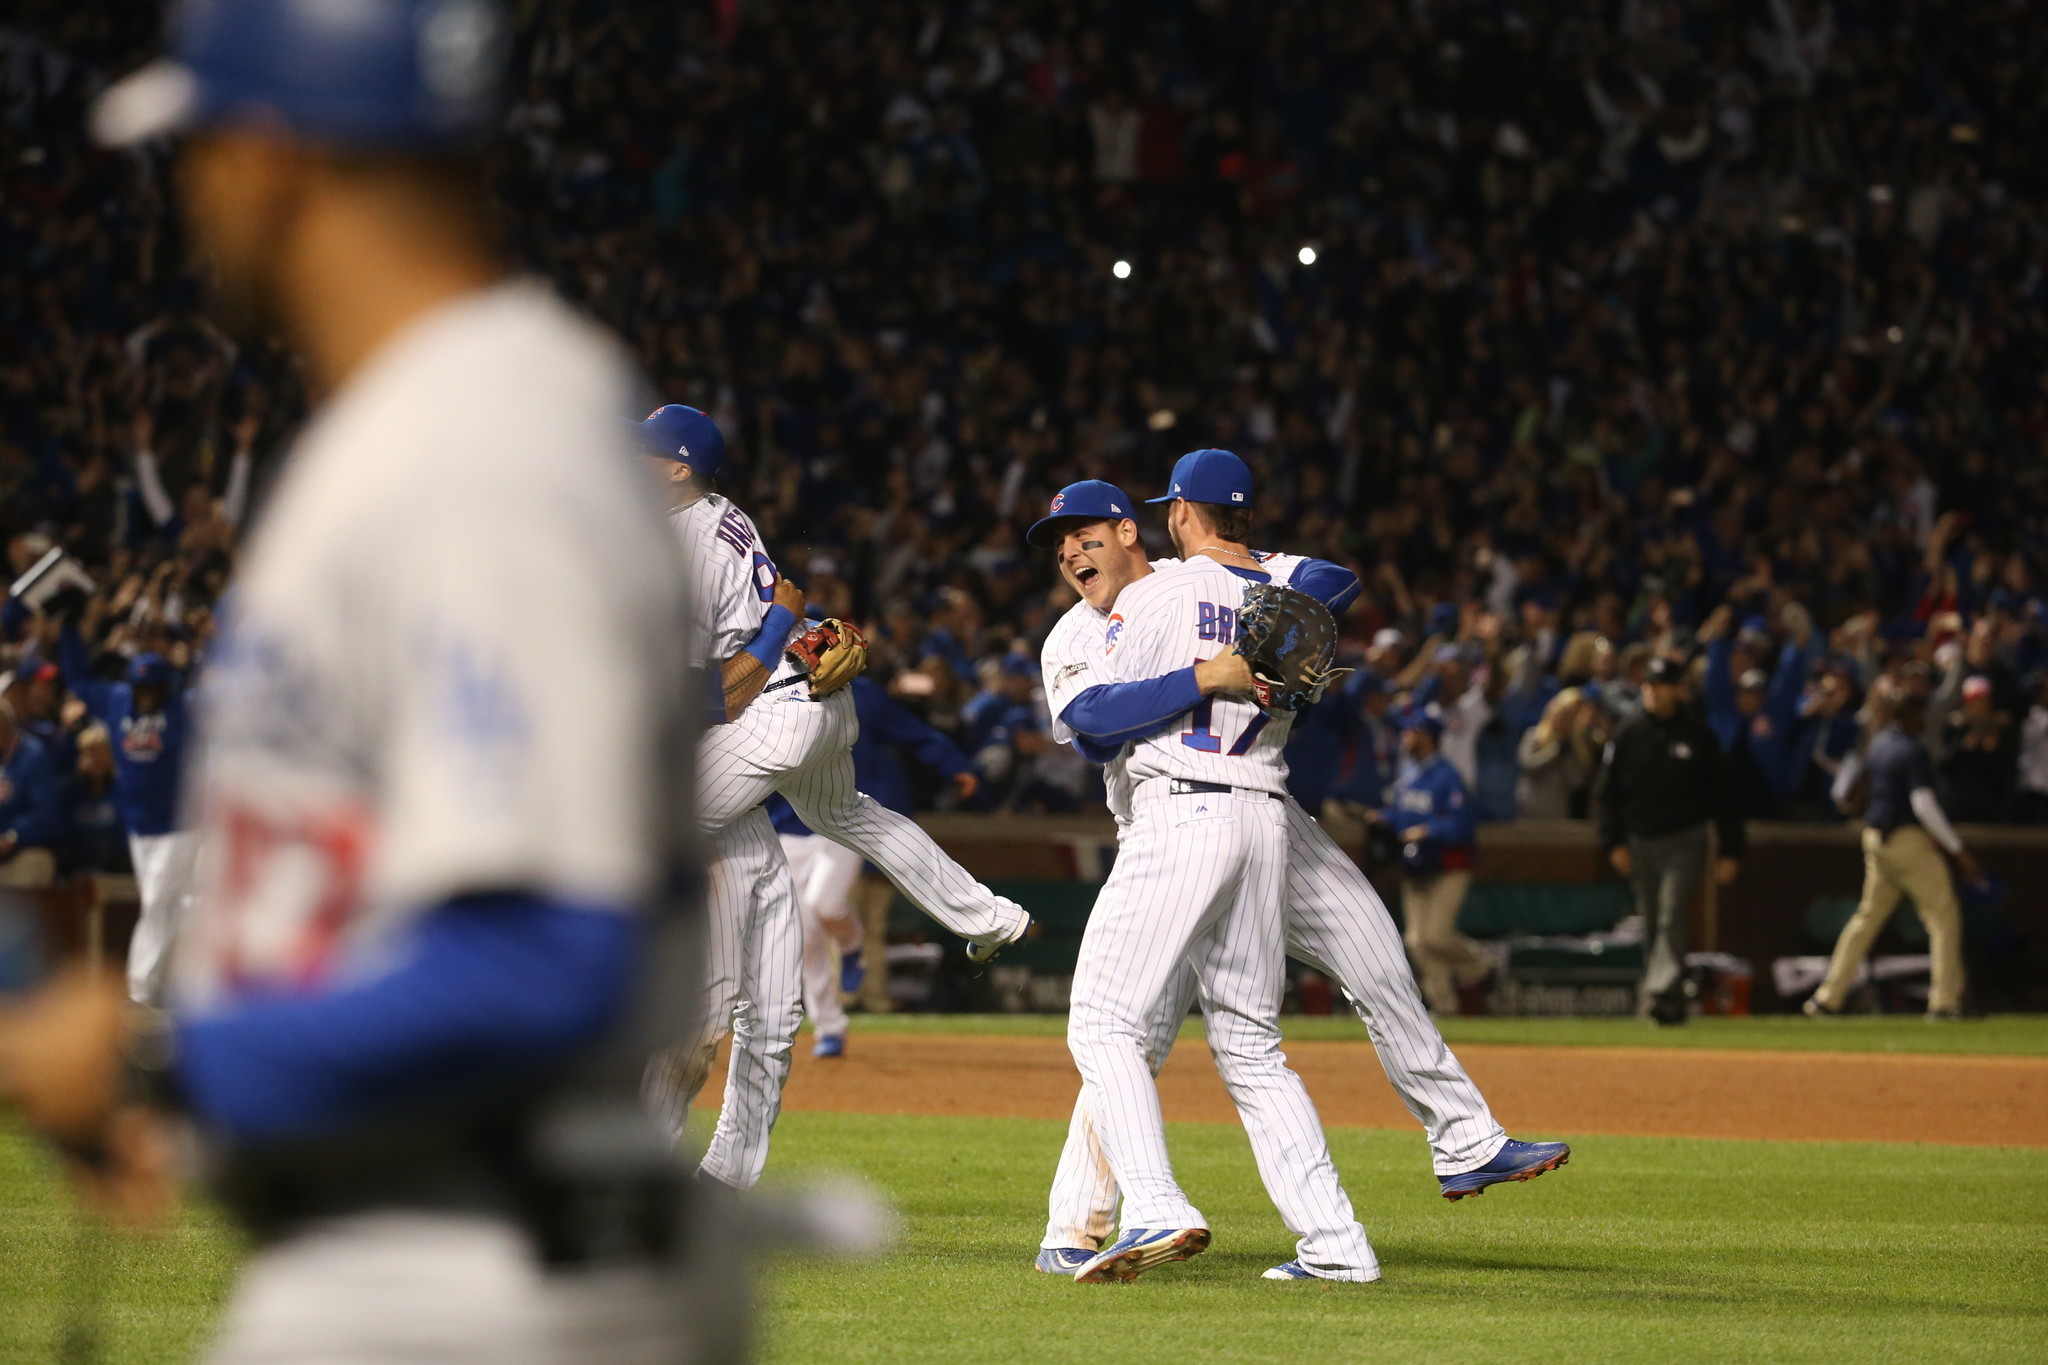 Cubs near-perfect in beating Dodgers 5-0 to win first NL pennant since 1945